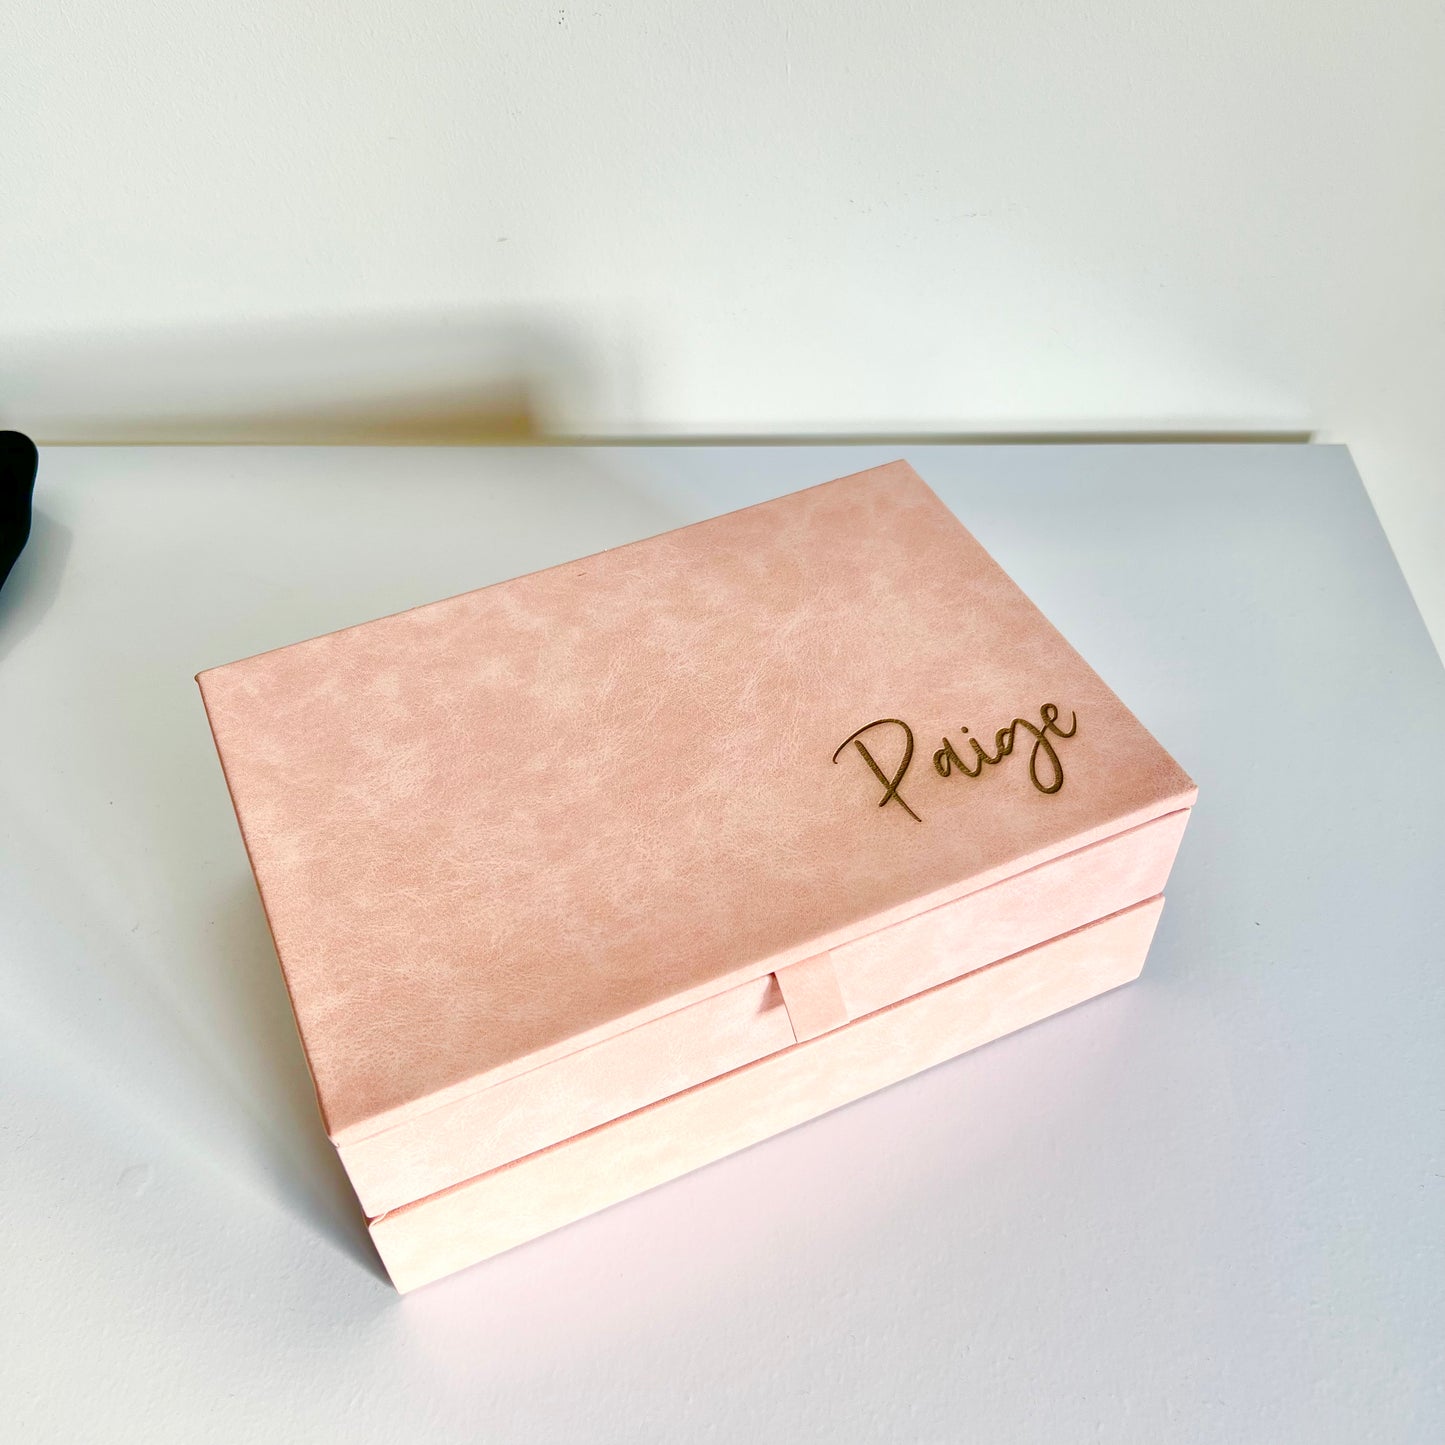 Jewellery box with engraved name